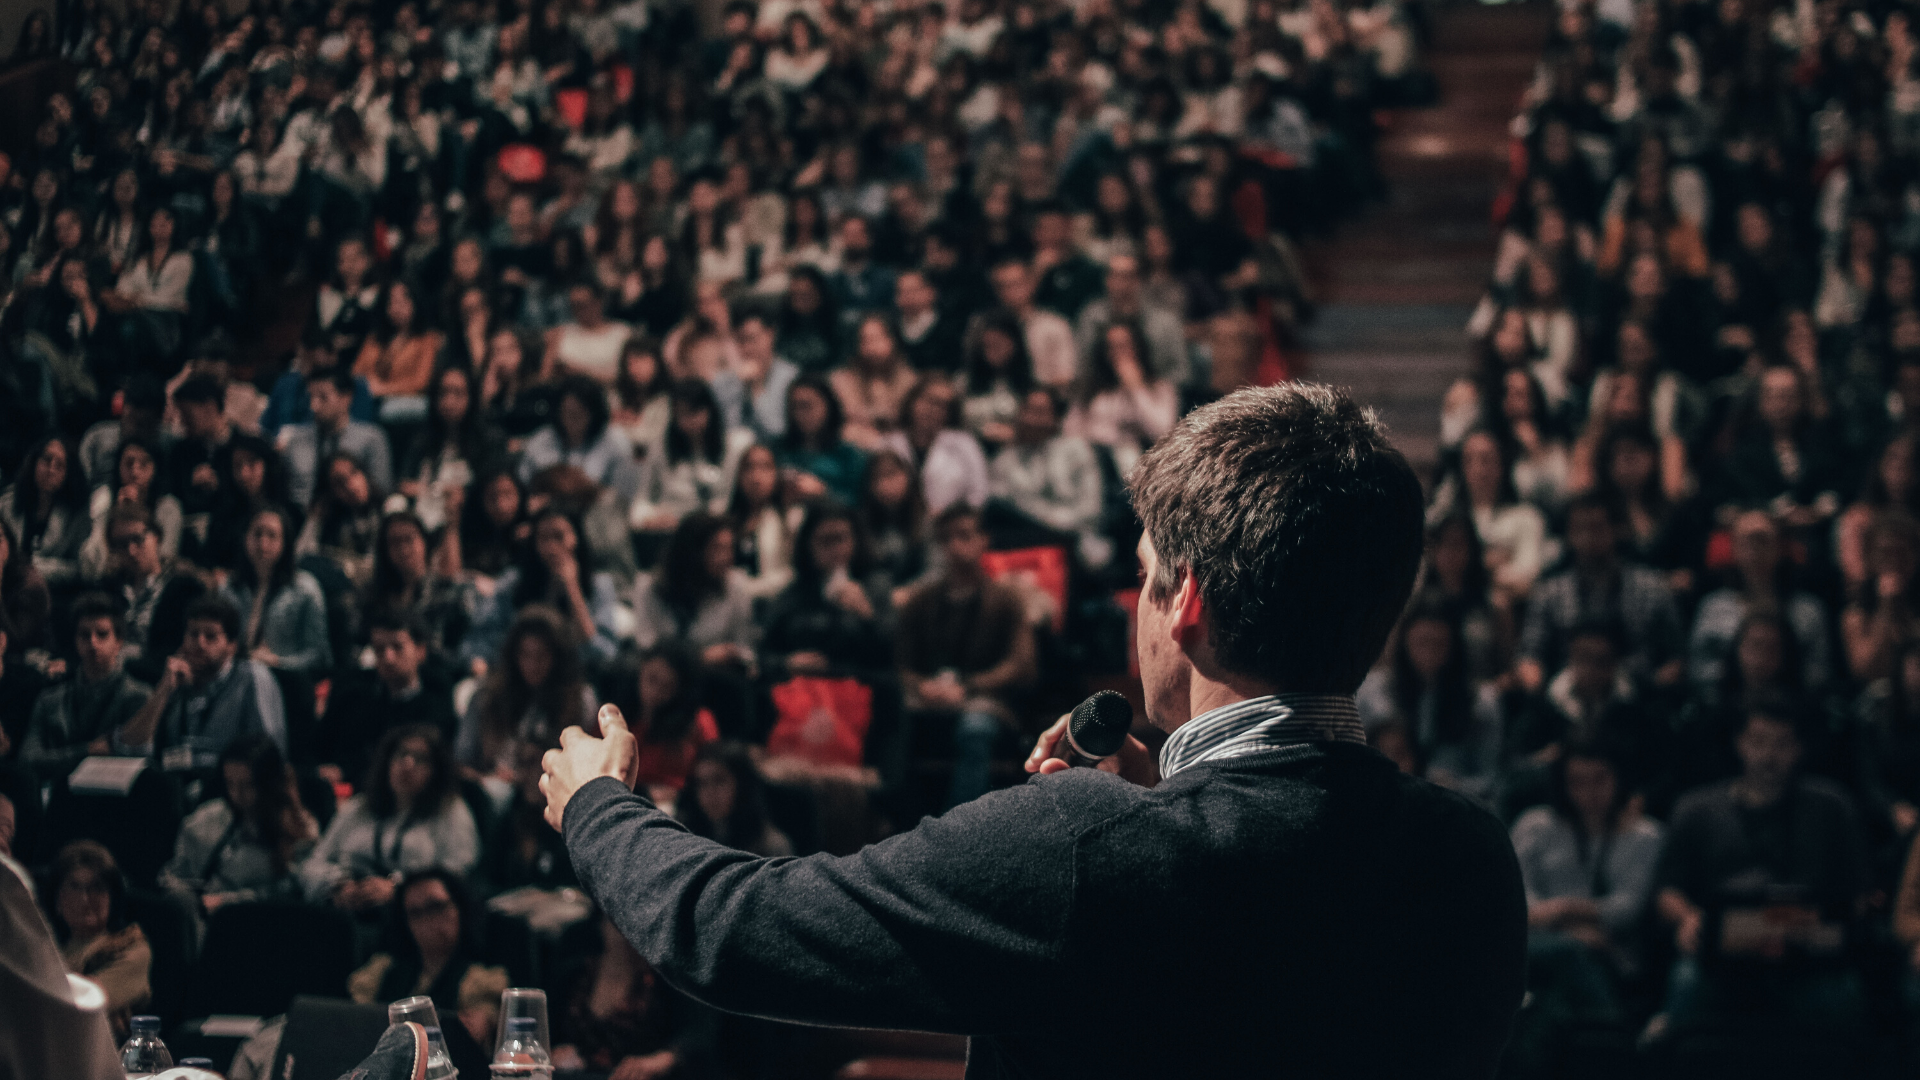 the back of a man speaking to a large auditorium filled with people